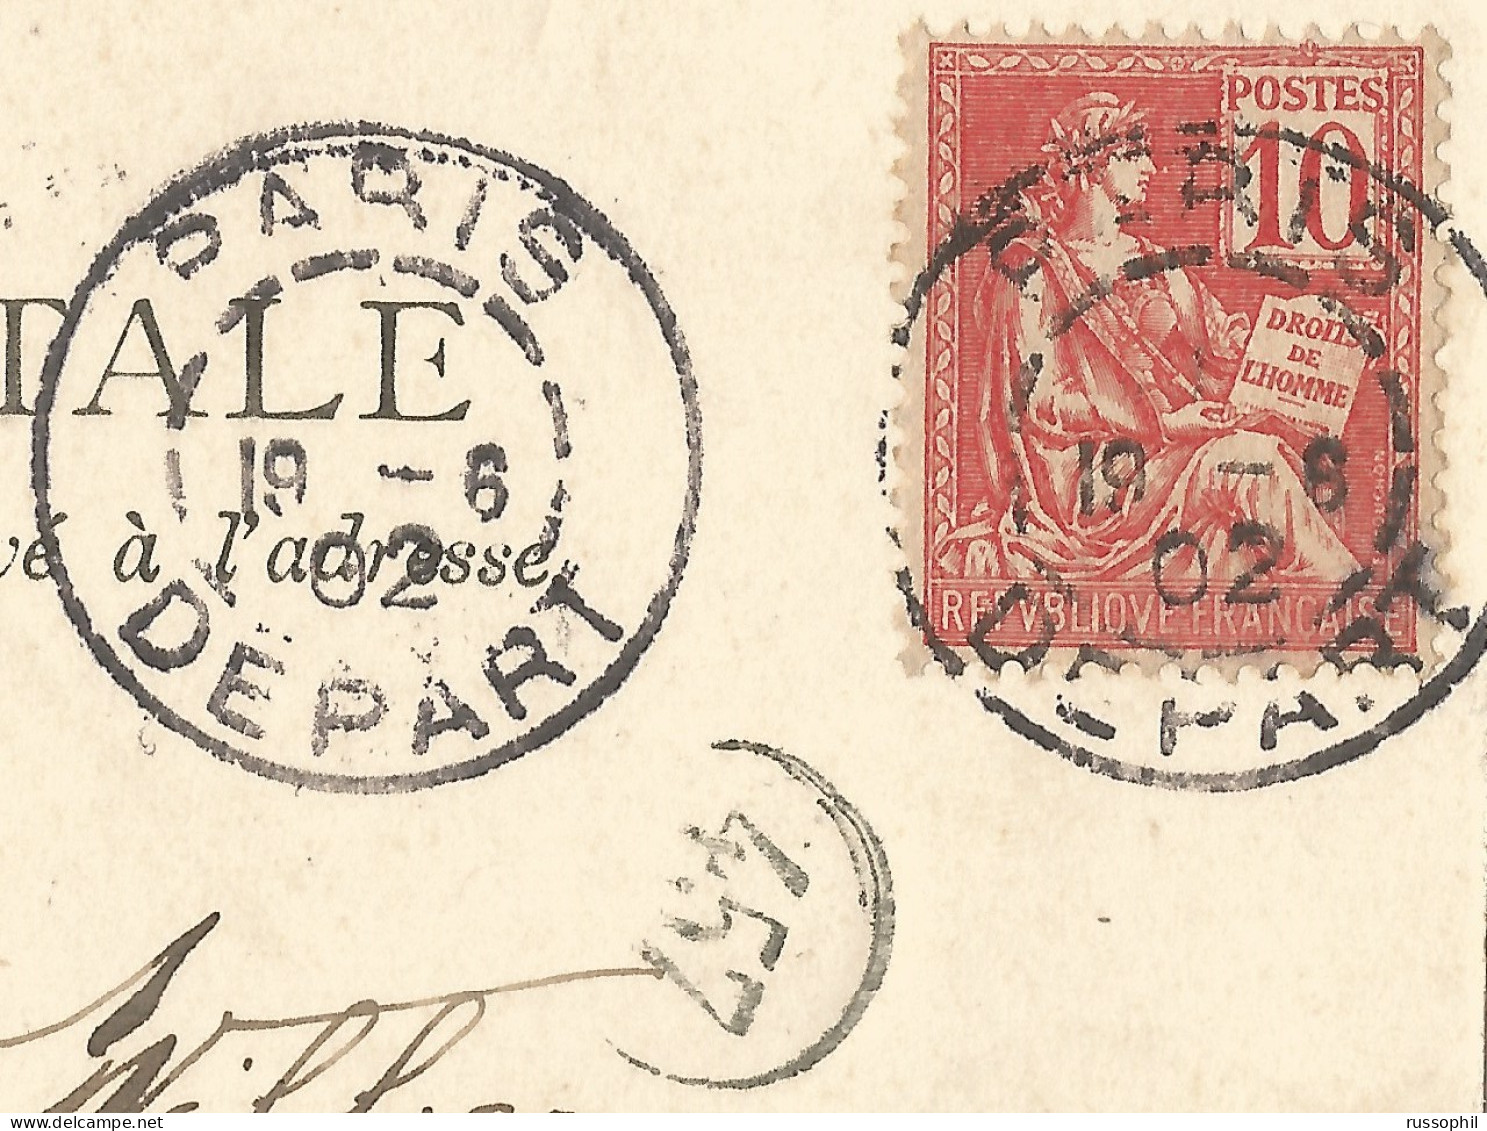 FRANCE - VARIETY &  CURIOSITY - 75 - A3 DEPARTURE CDSs "PARIS DEPART"  ON PC - HOUR MISSING IN DATE BLOCK - 1902 - Lettres & Documents